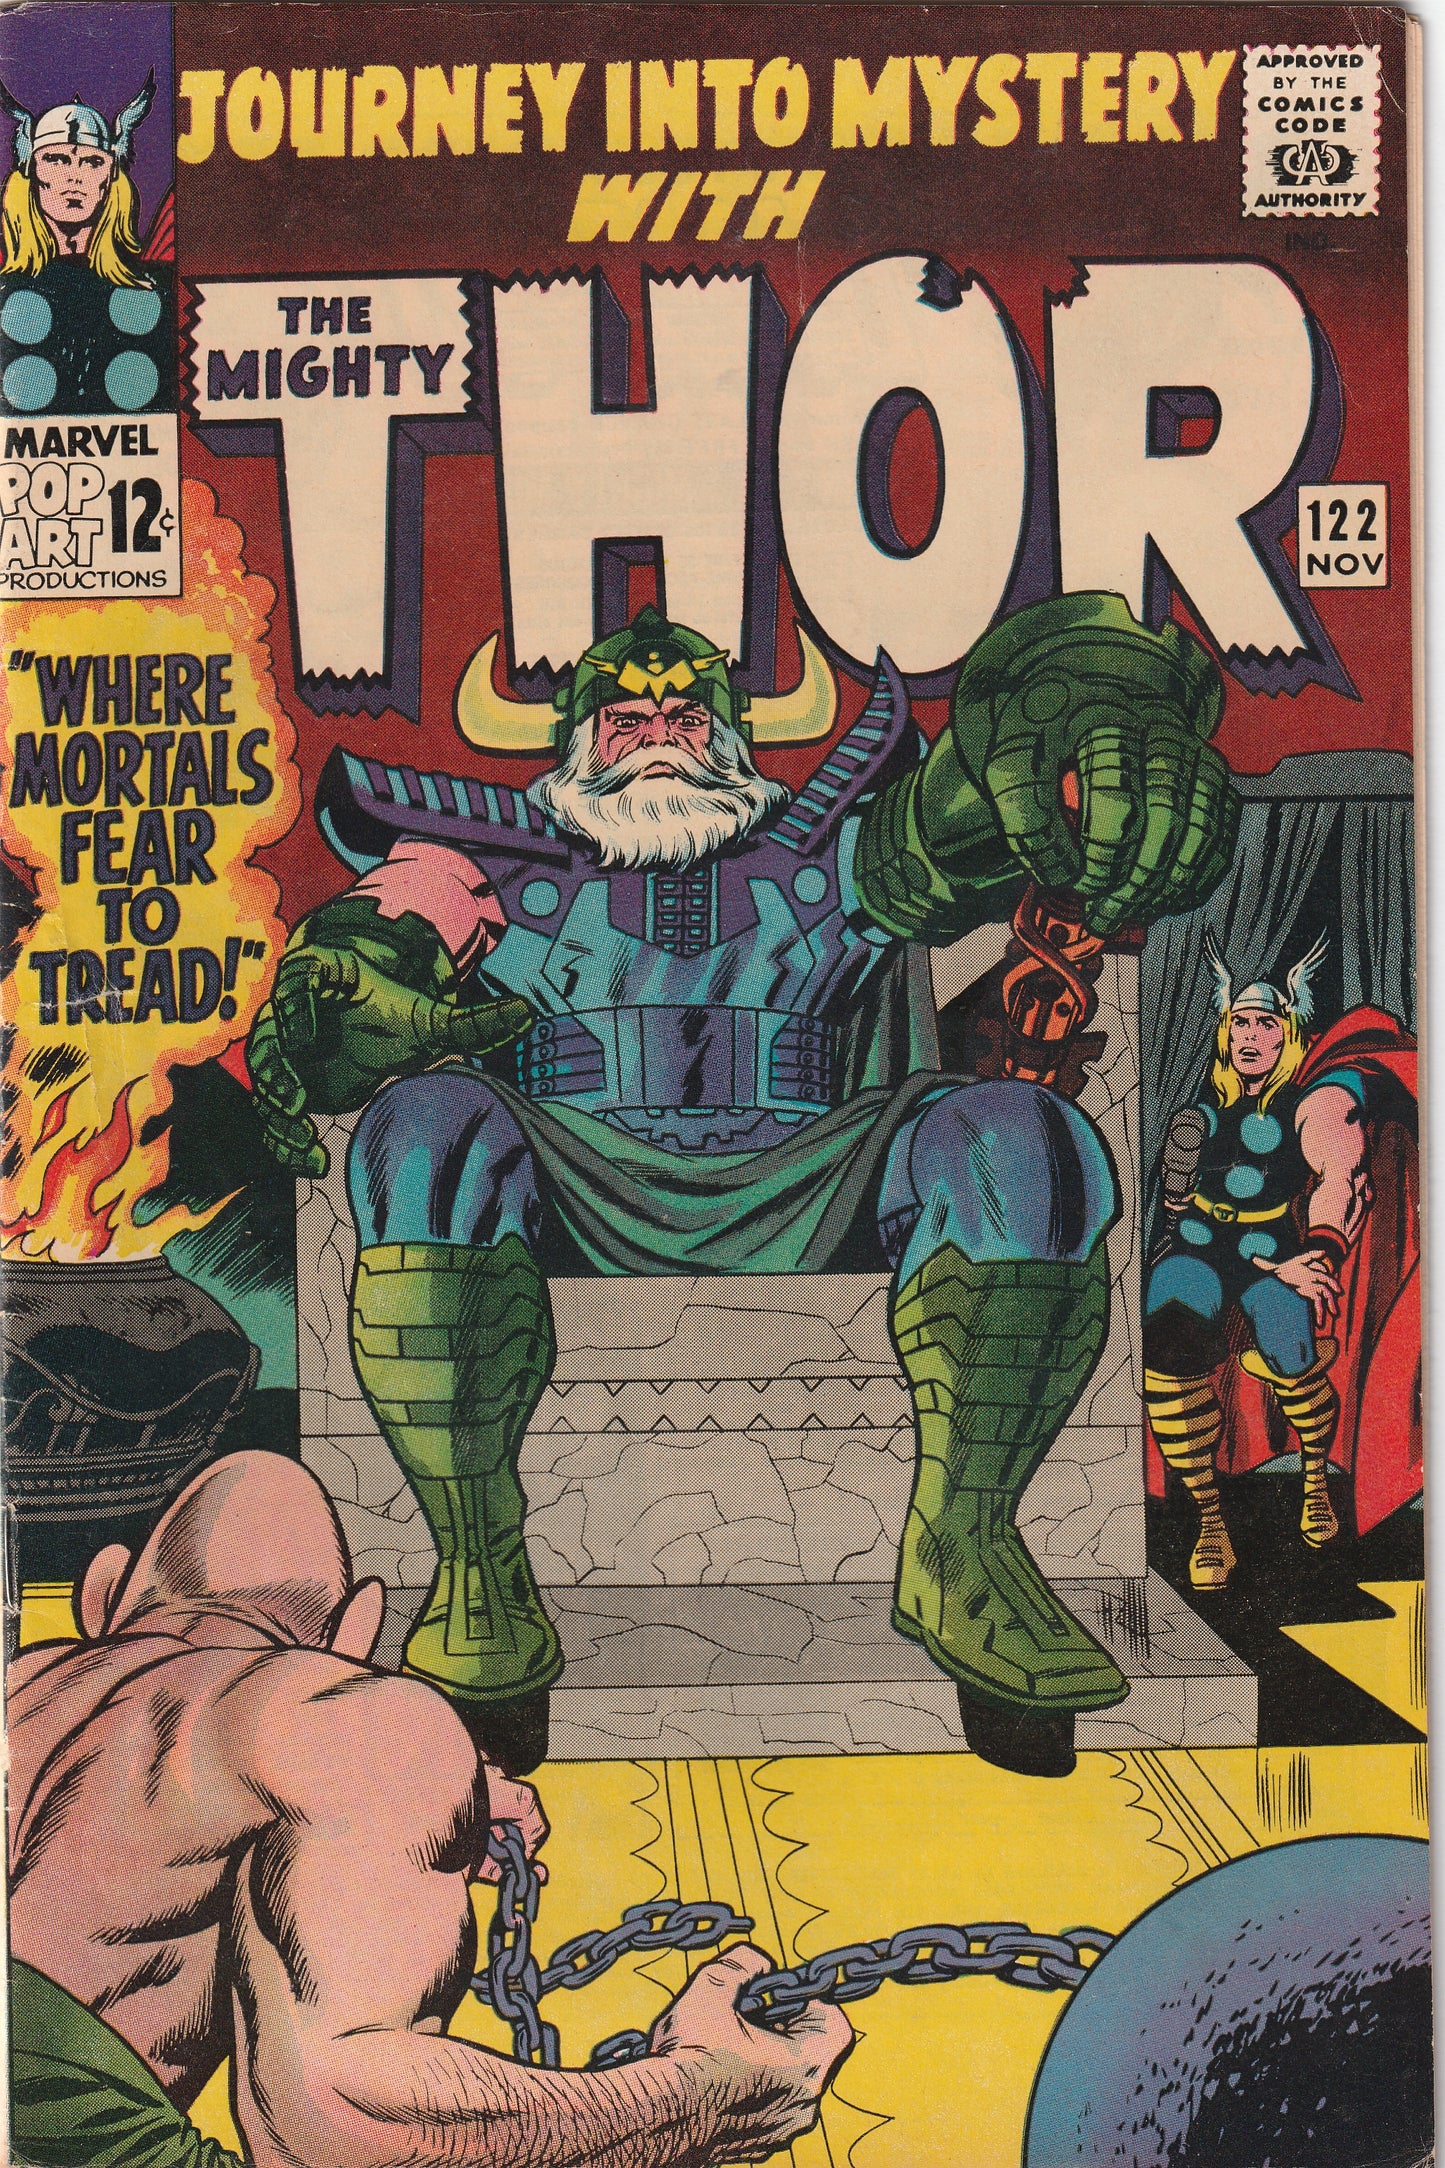 Journey Into Mystery #122 (1965) - With Thor